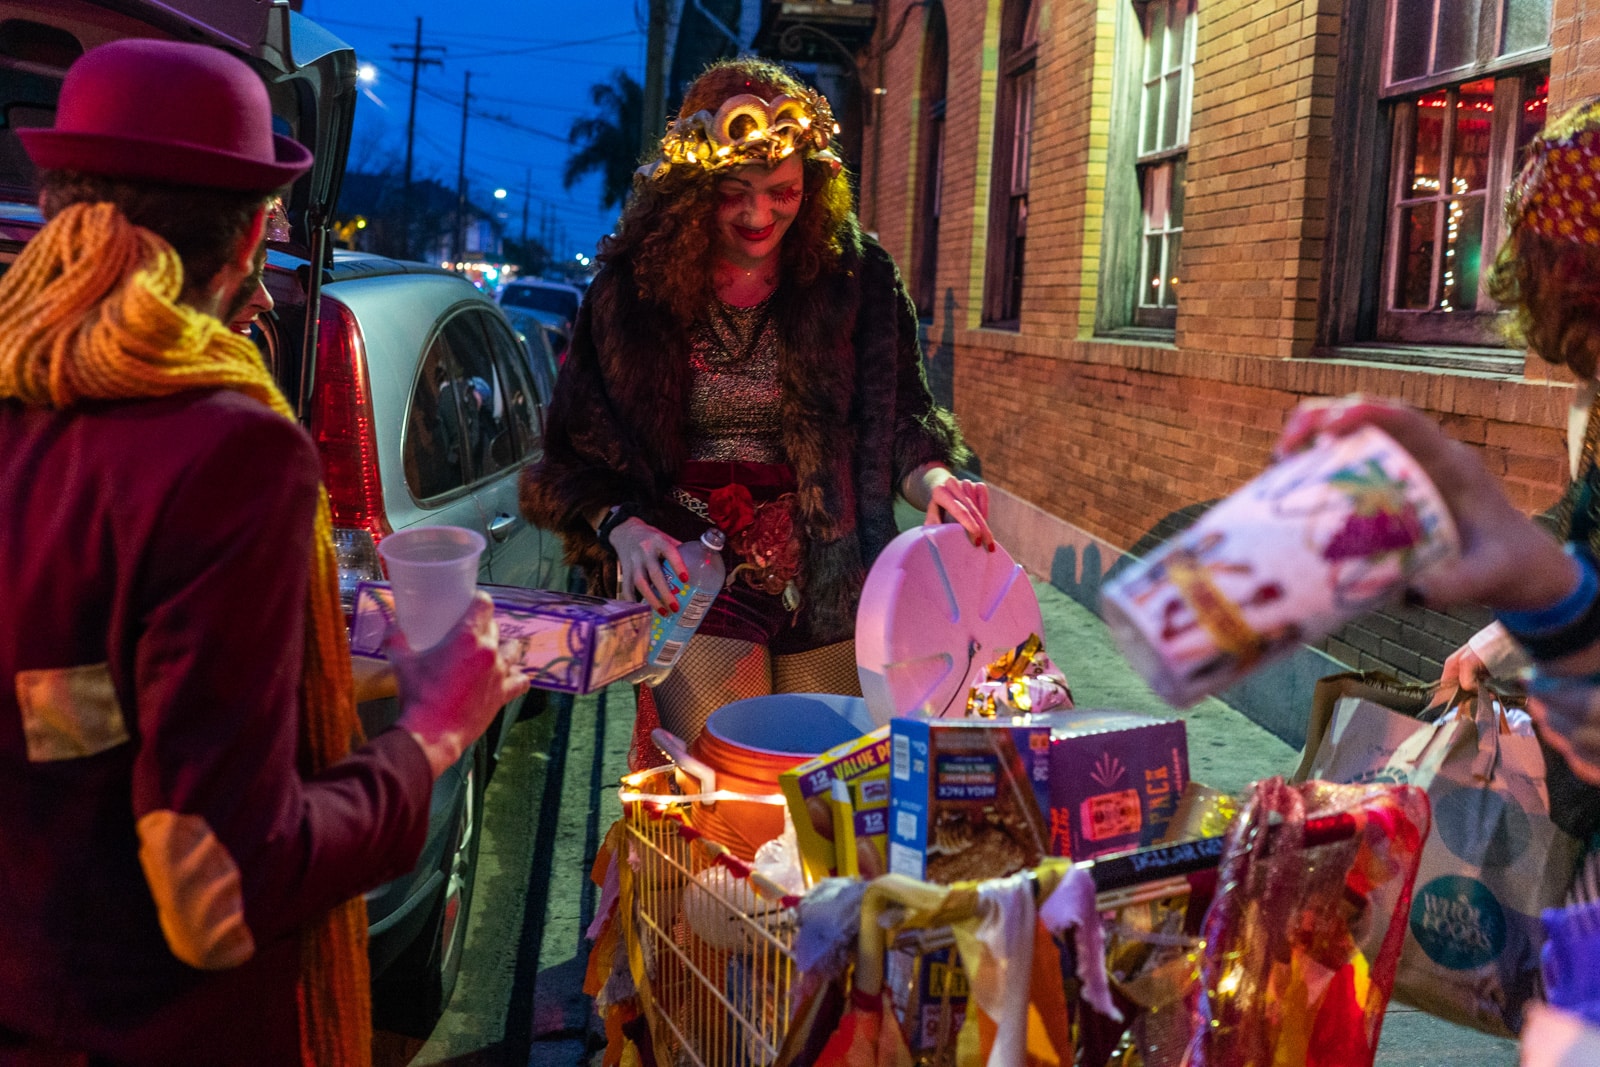 Filling a shopping cart with snacks and alcohol for a Mardi Gras parade in New Orleans